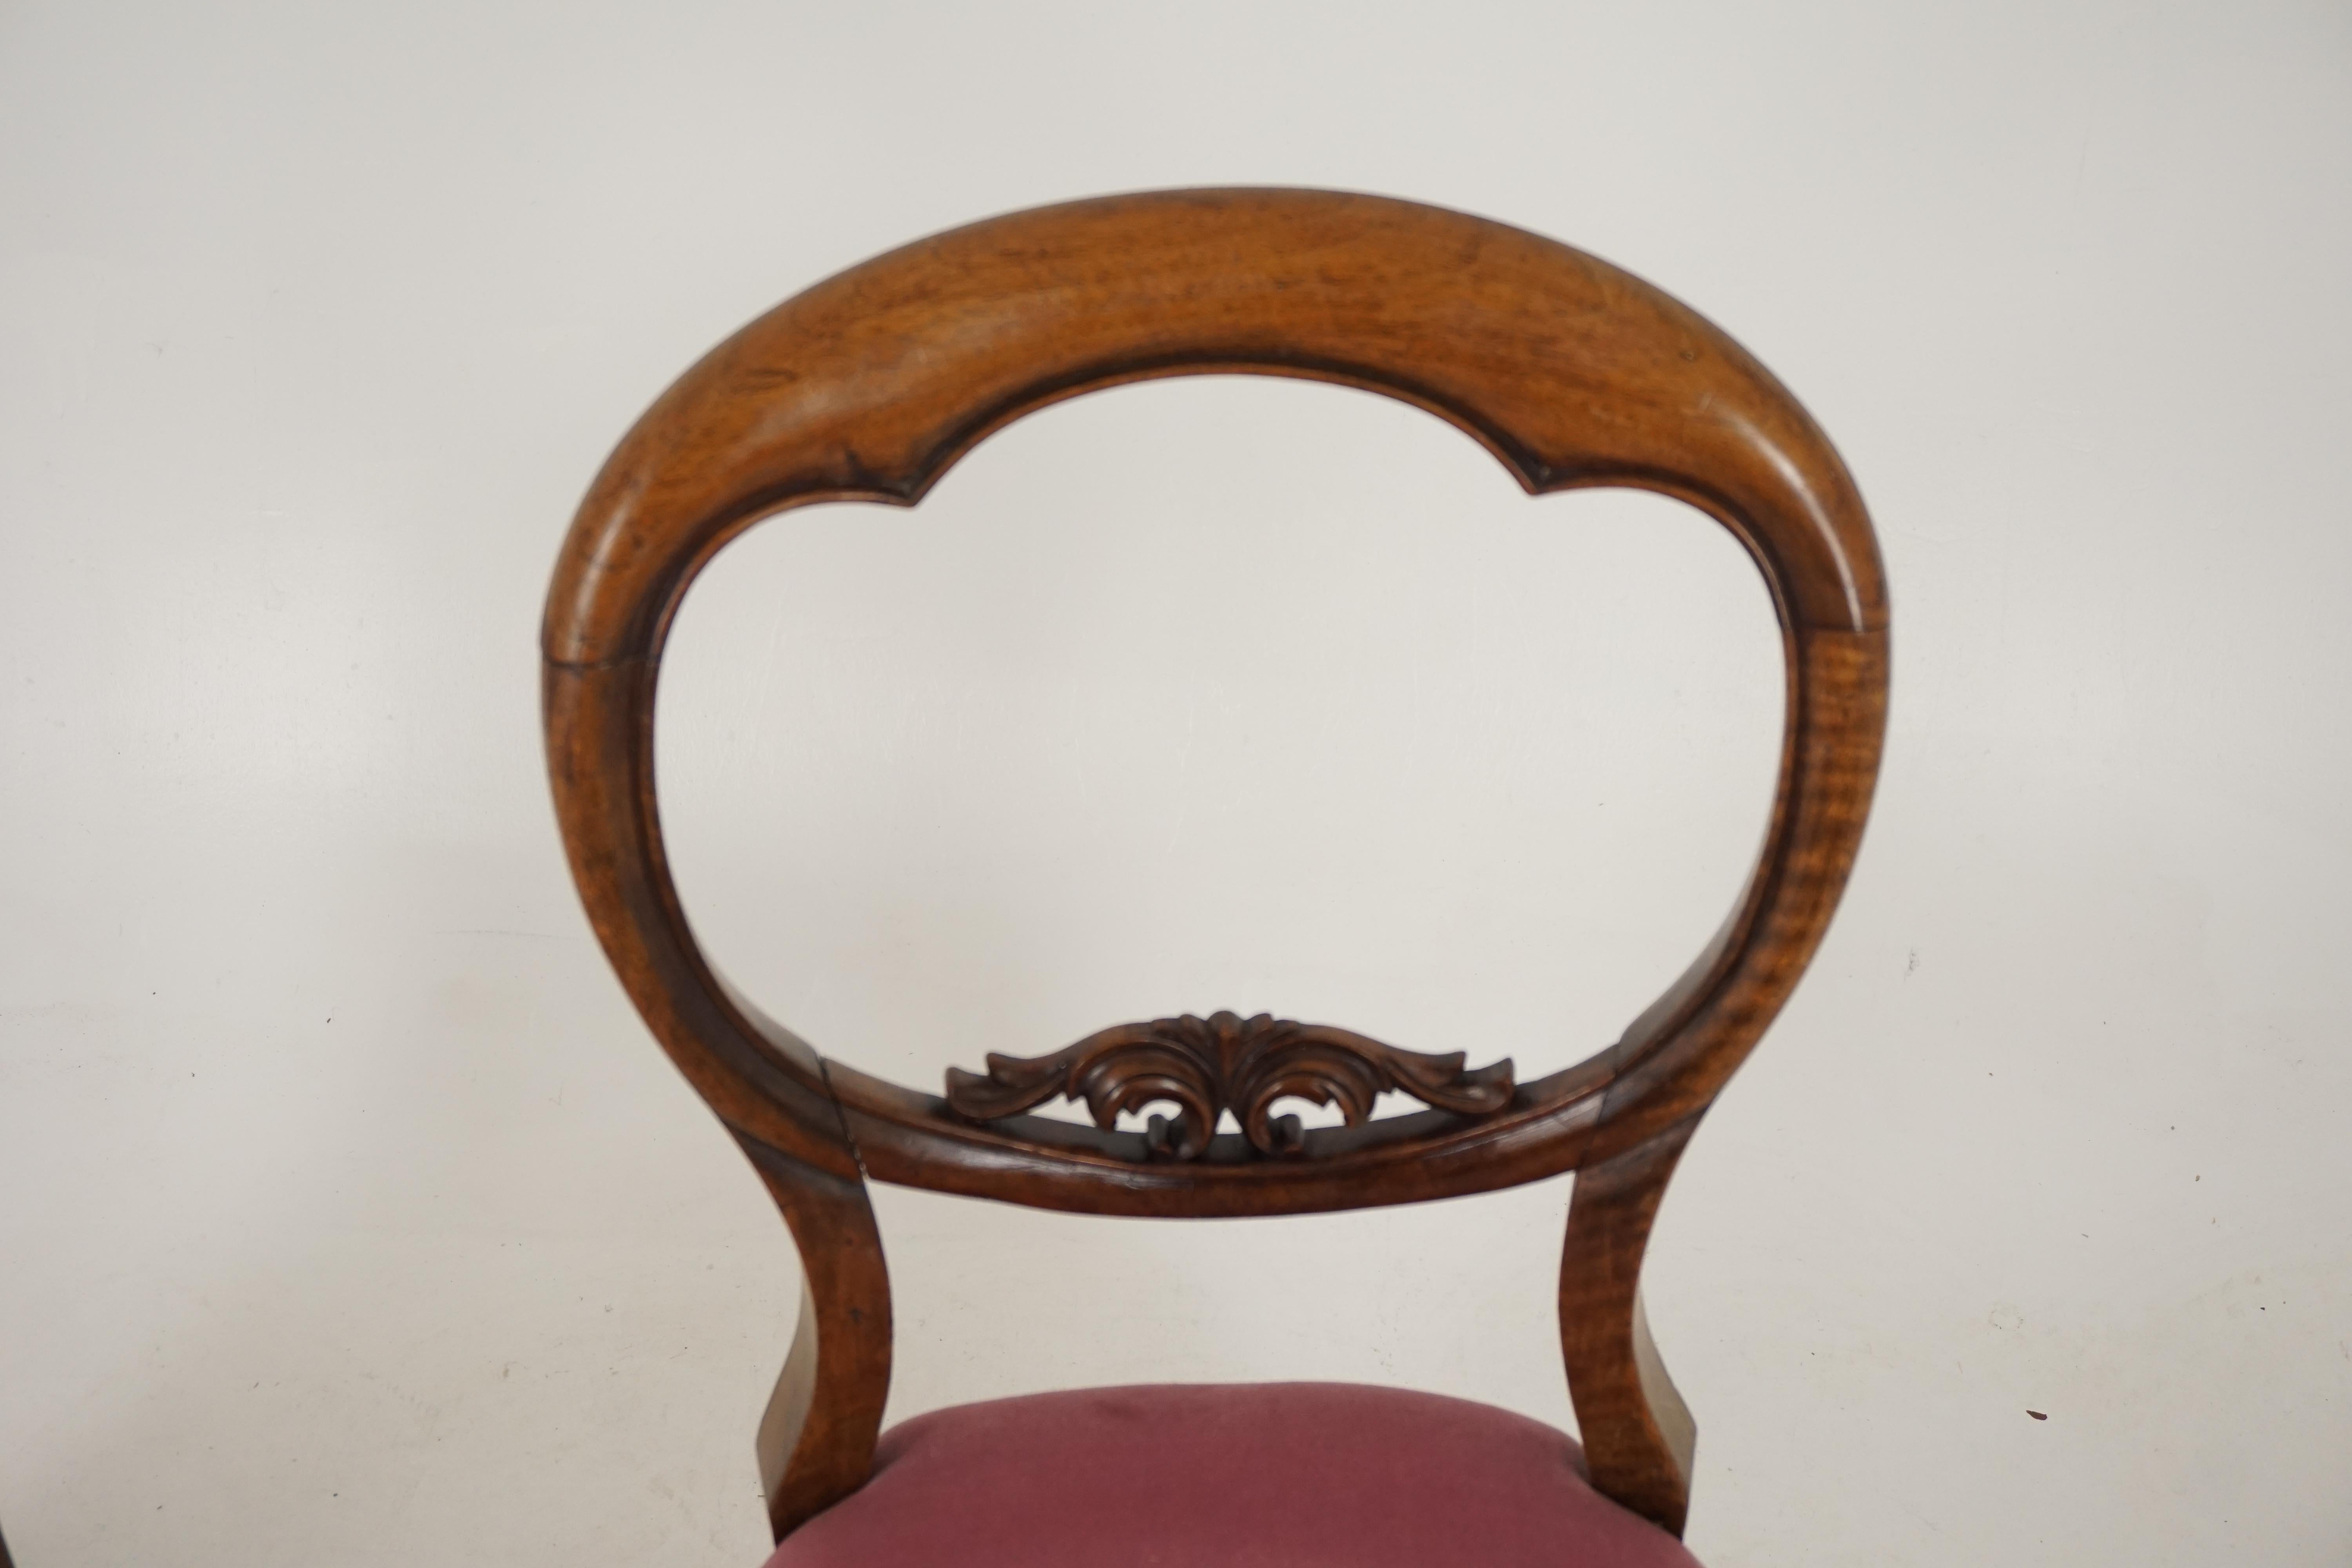 Antique Victorian chairs, walnut balloon back occasional chairs, antique furniture, Scotland 1880, B2017

Scotland, 1880
Solid walnut
Original finish
Shaped open back
Carved cross rail
Upholstered seat below
Standing on cabriole legs to the